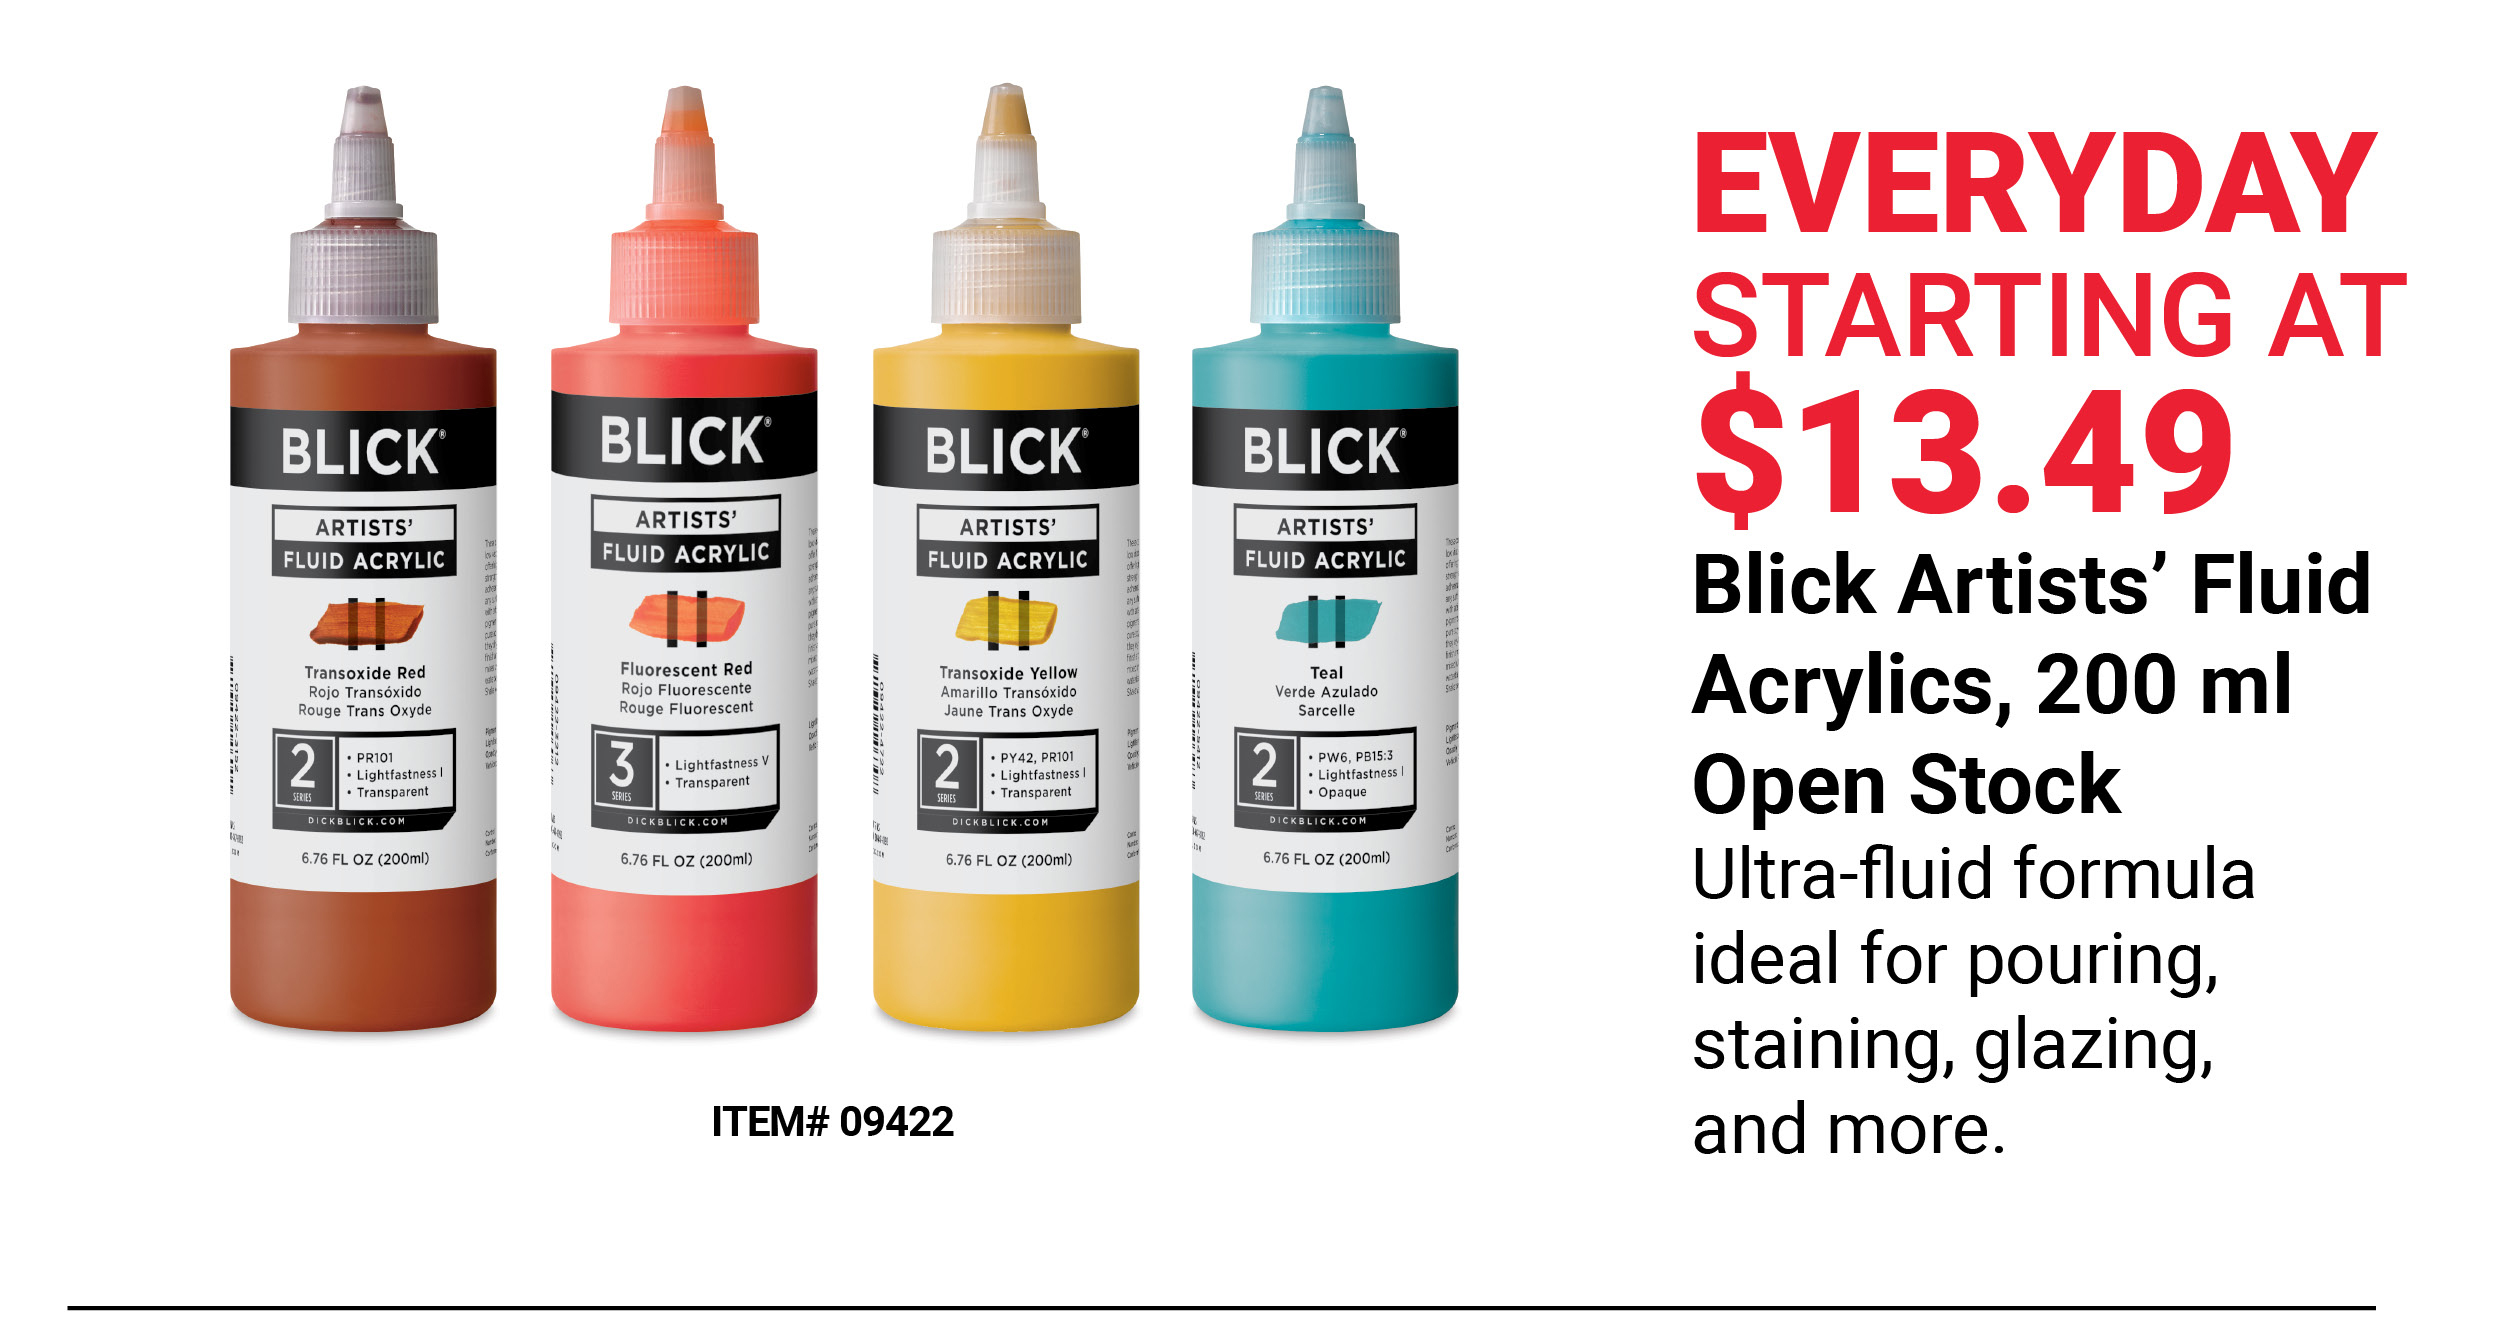 Blick Artists' Fluid Arylics, 200 ml Open Stock Everyday Starting at $13.49